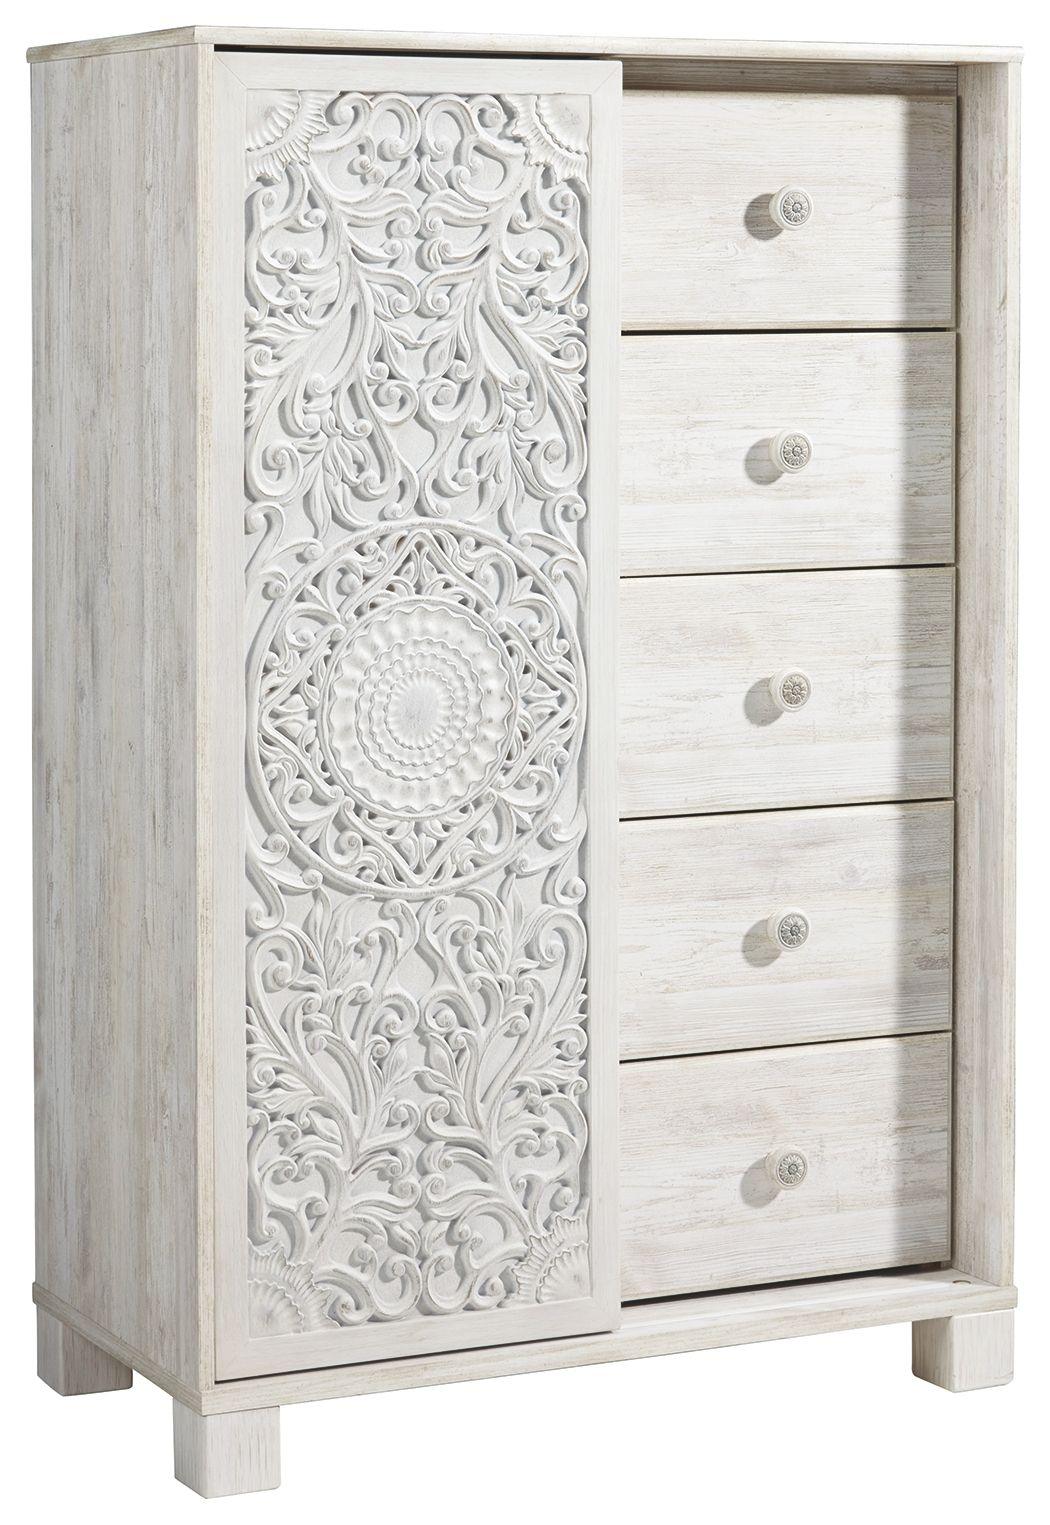 Ashley Furniture - Paxberry - Whitewash - Dressing Chest - 5th Avenue Furniture